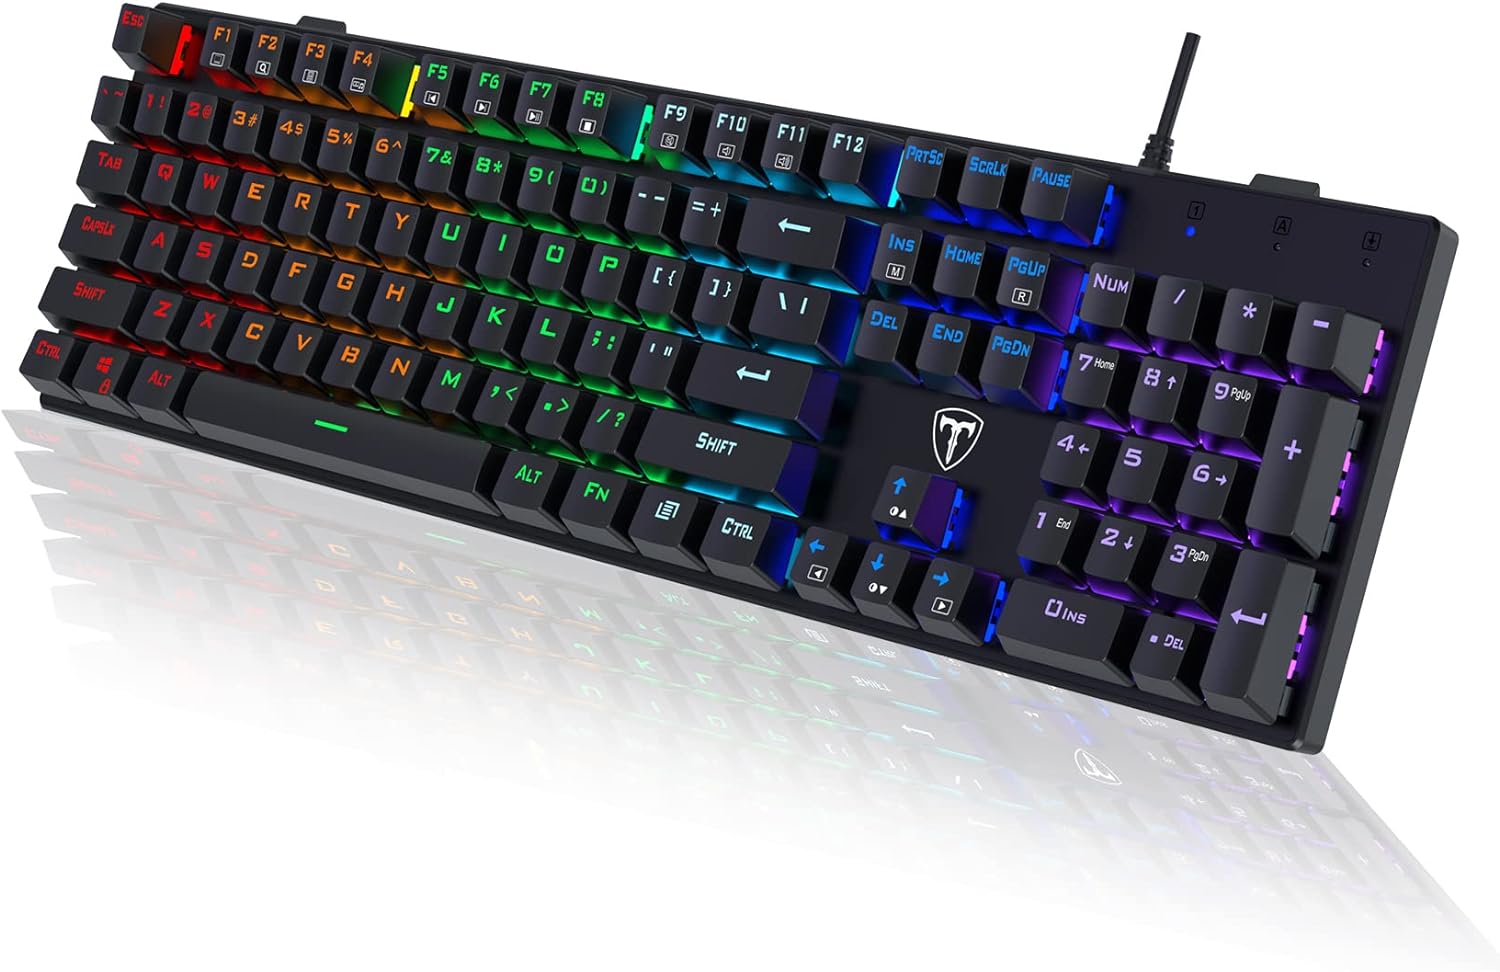 RisoPhy Mechanical Gaming Keyboard, RGB 104 Keys Ultra-Slim LED Backlit USB Wired Keyboard with Blue Switch, Durable Abs Keycaps/Anti-Ghosting/Spill-Resistant Computer Keyboard for PC Mac Xbox Gamer